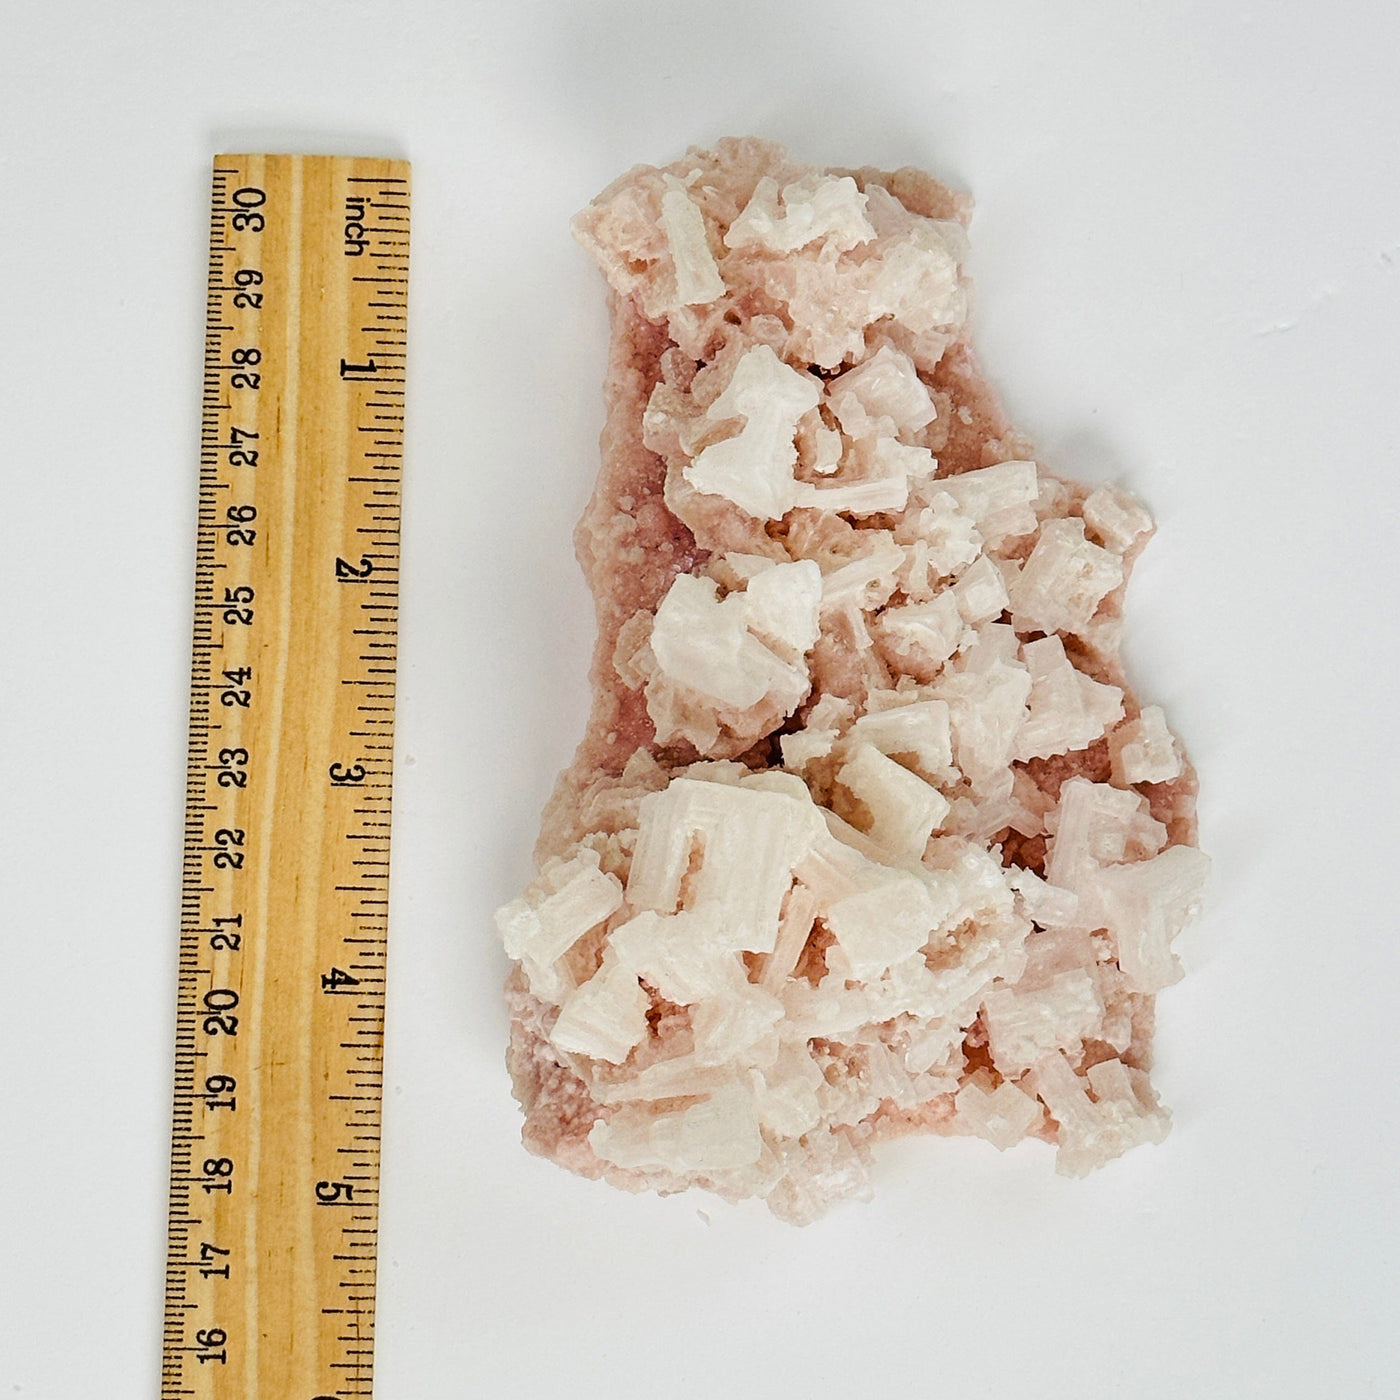 pink halite next to a ruler for size reference